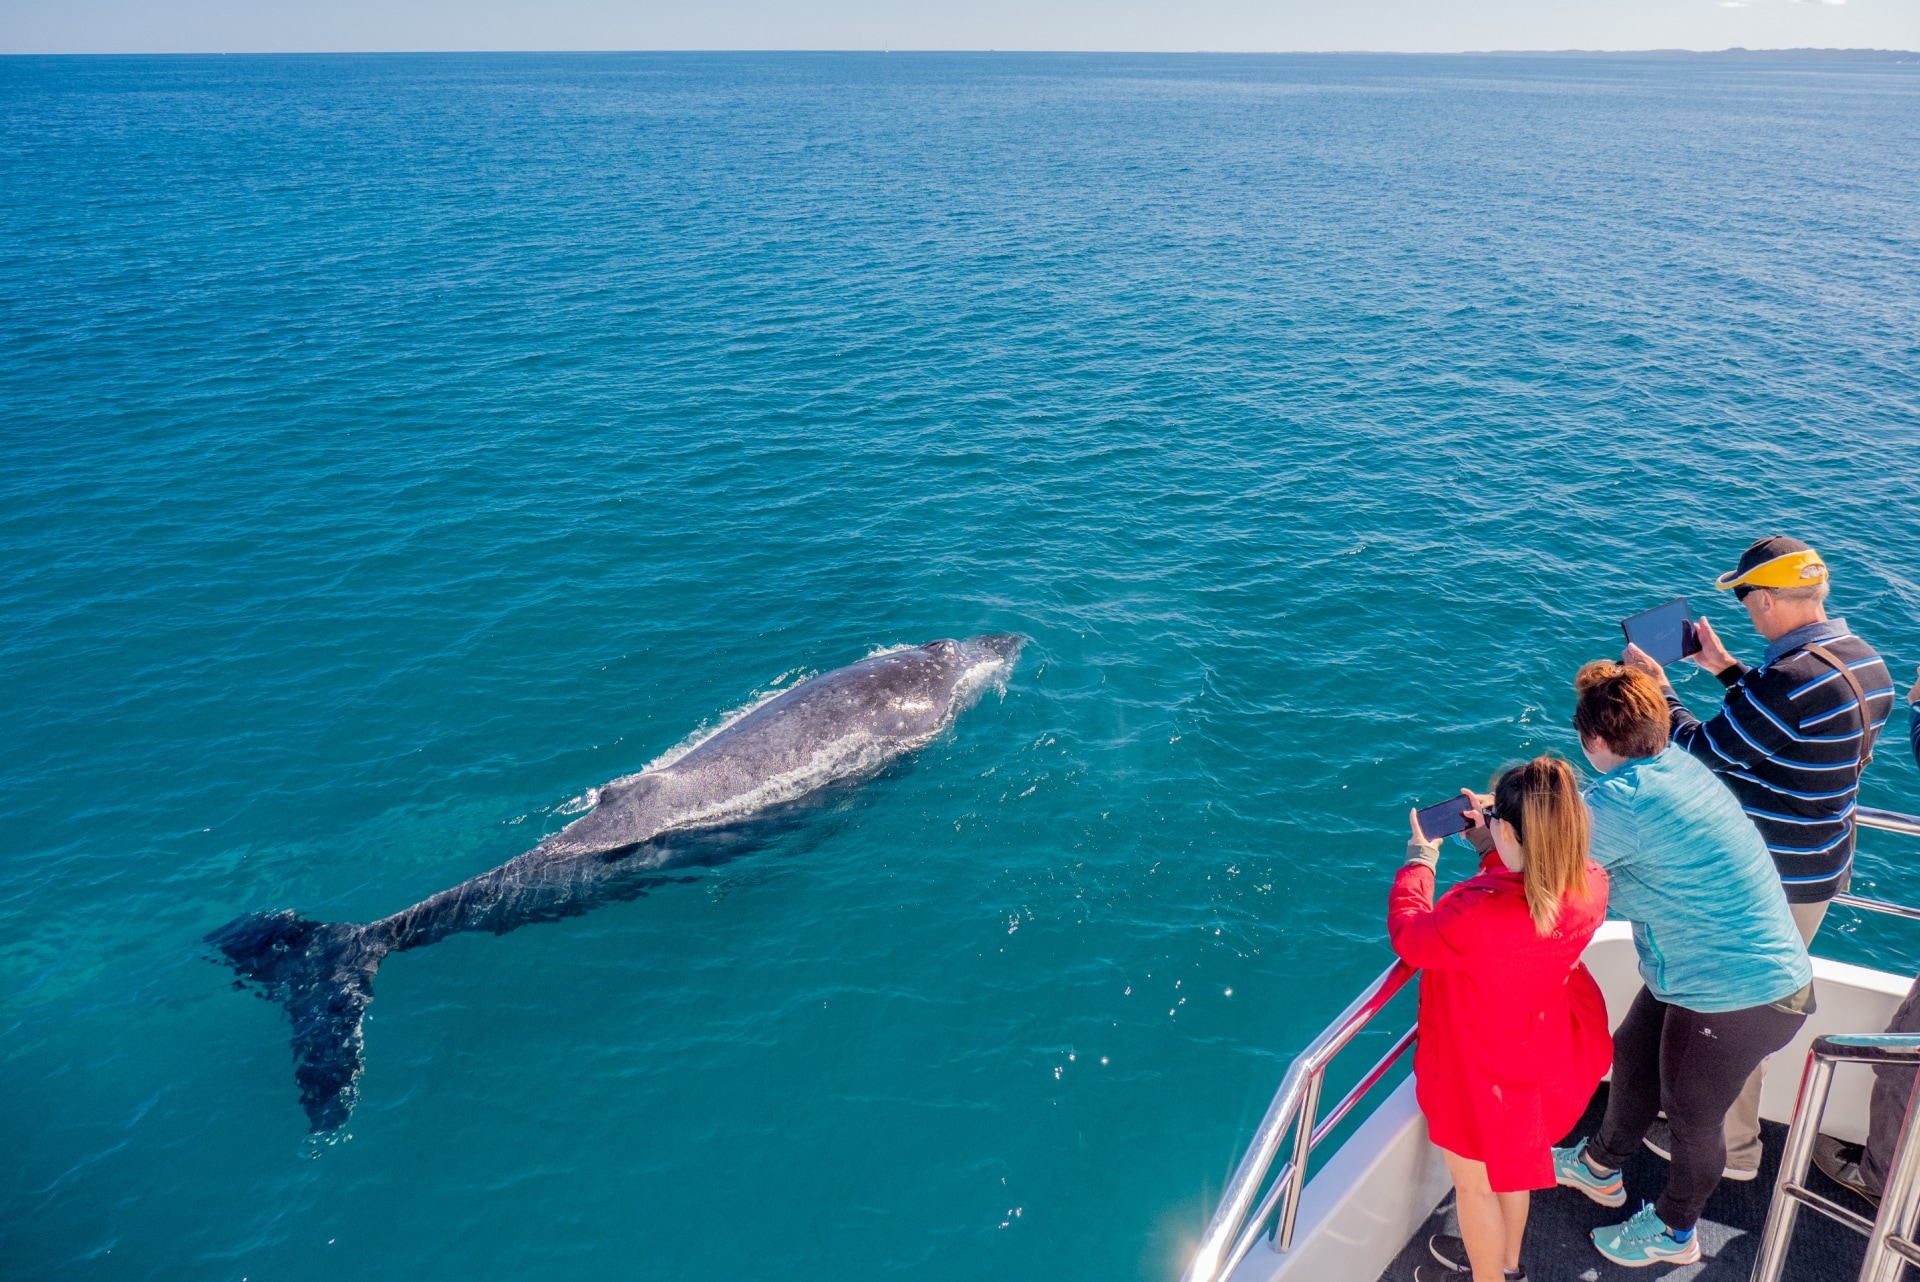 People watch whale from boat, Whale watching, Hervey Bay, QLD © Tourism Australia